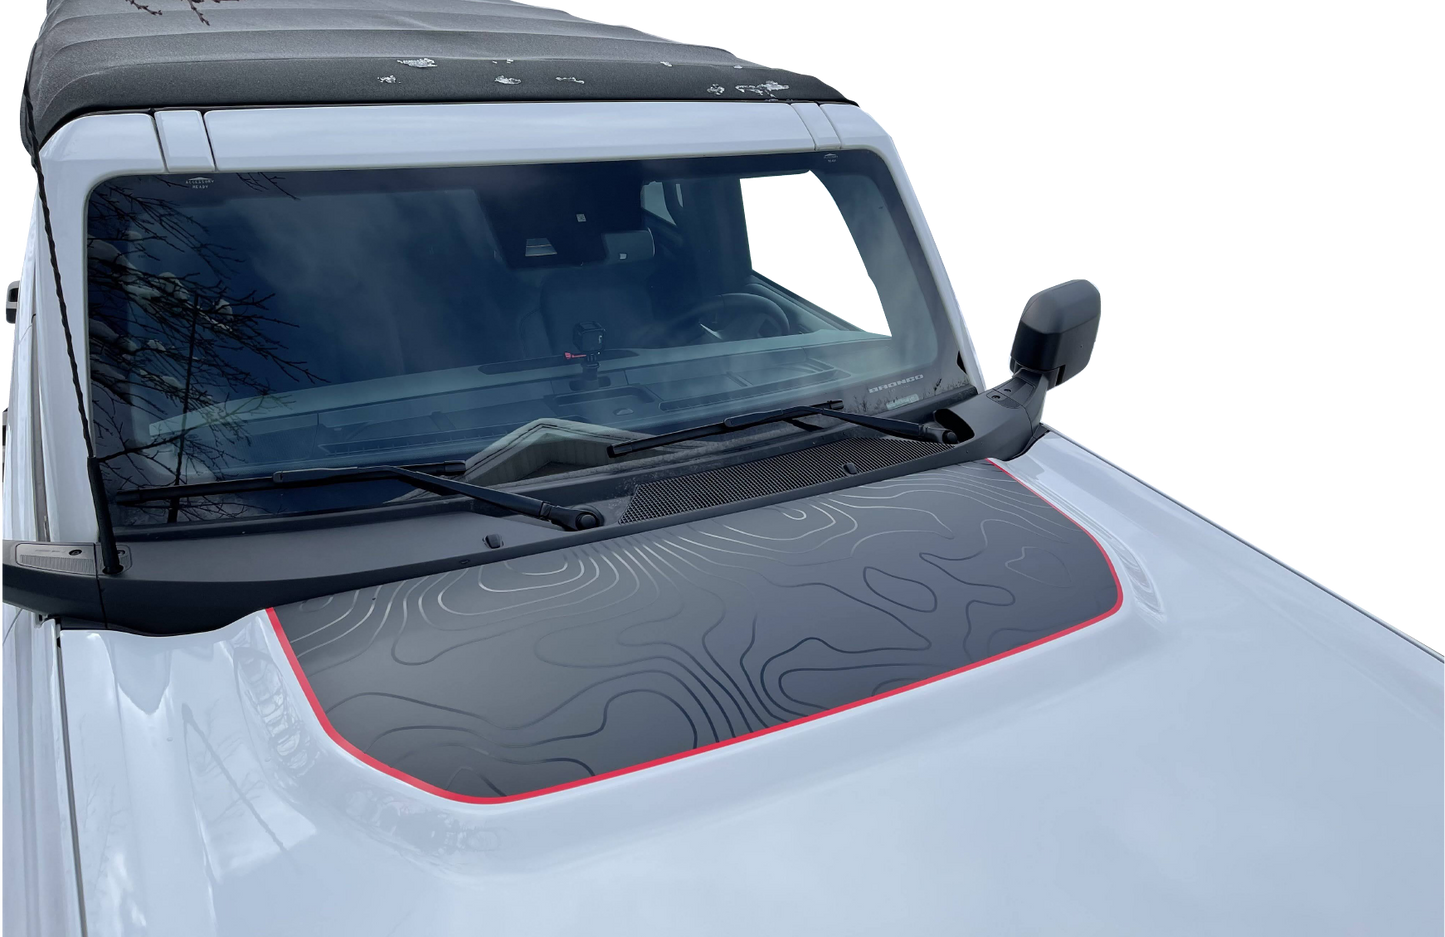 Bronco Topographical 3-Layer Hood Decal- Fits 2021+ Ford Bronco Hood Decal (3 Pieces)